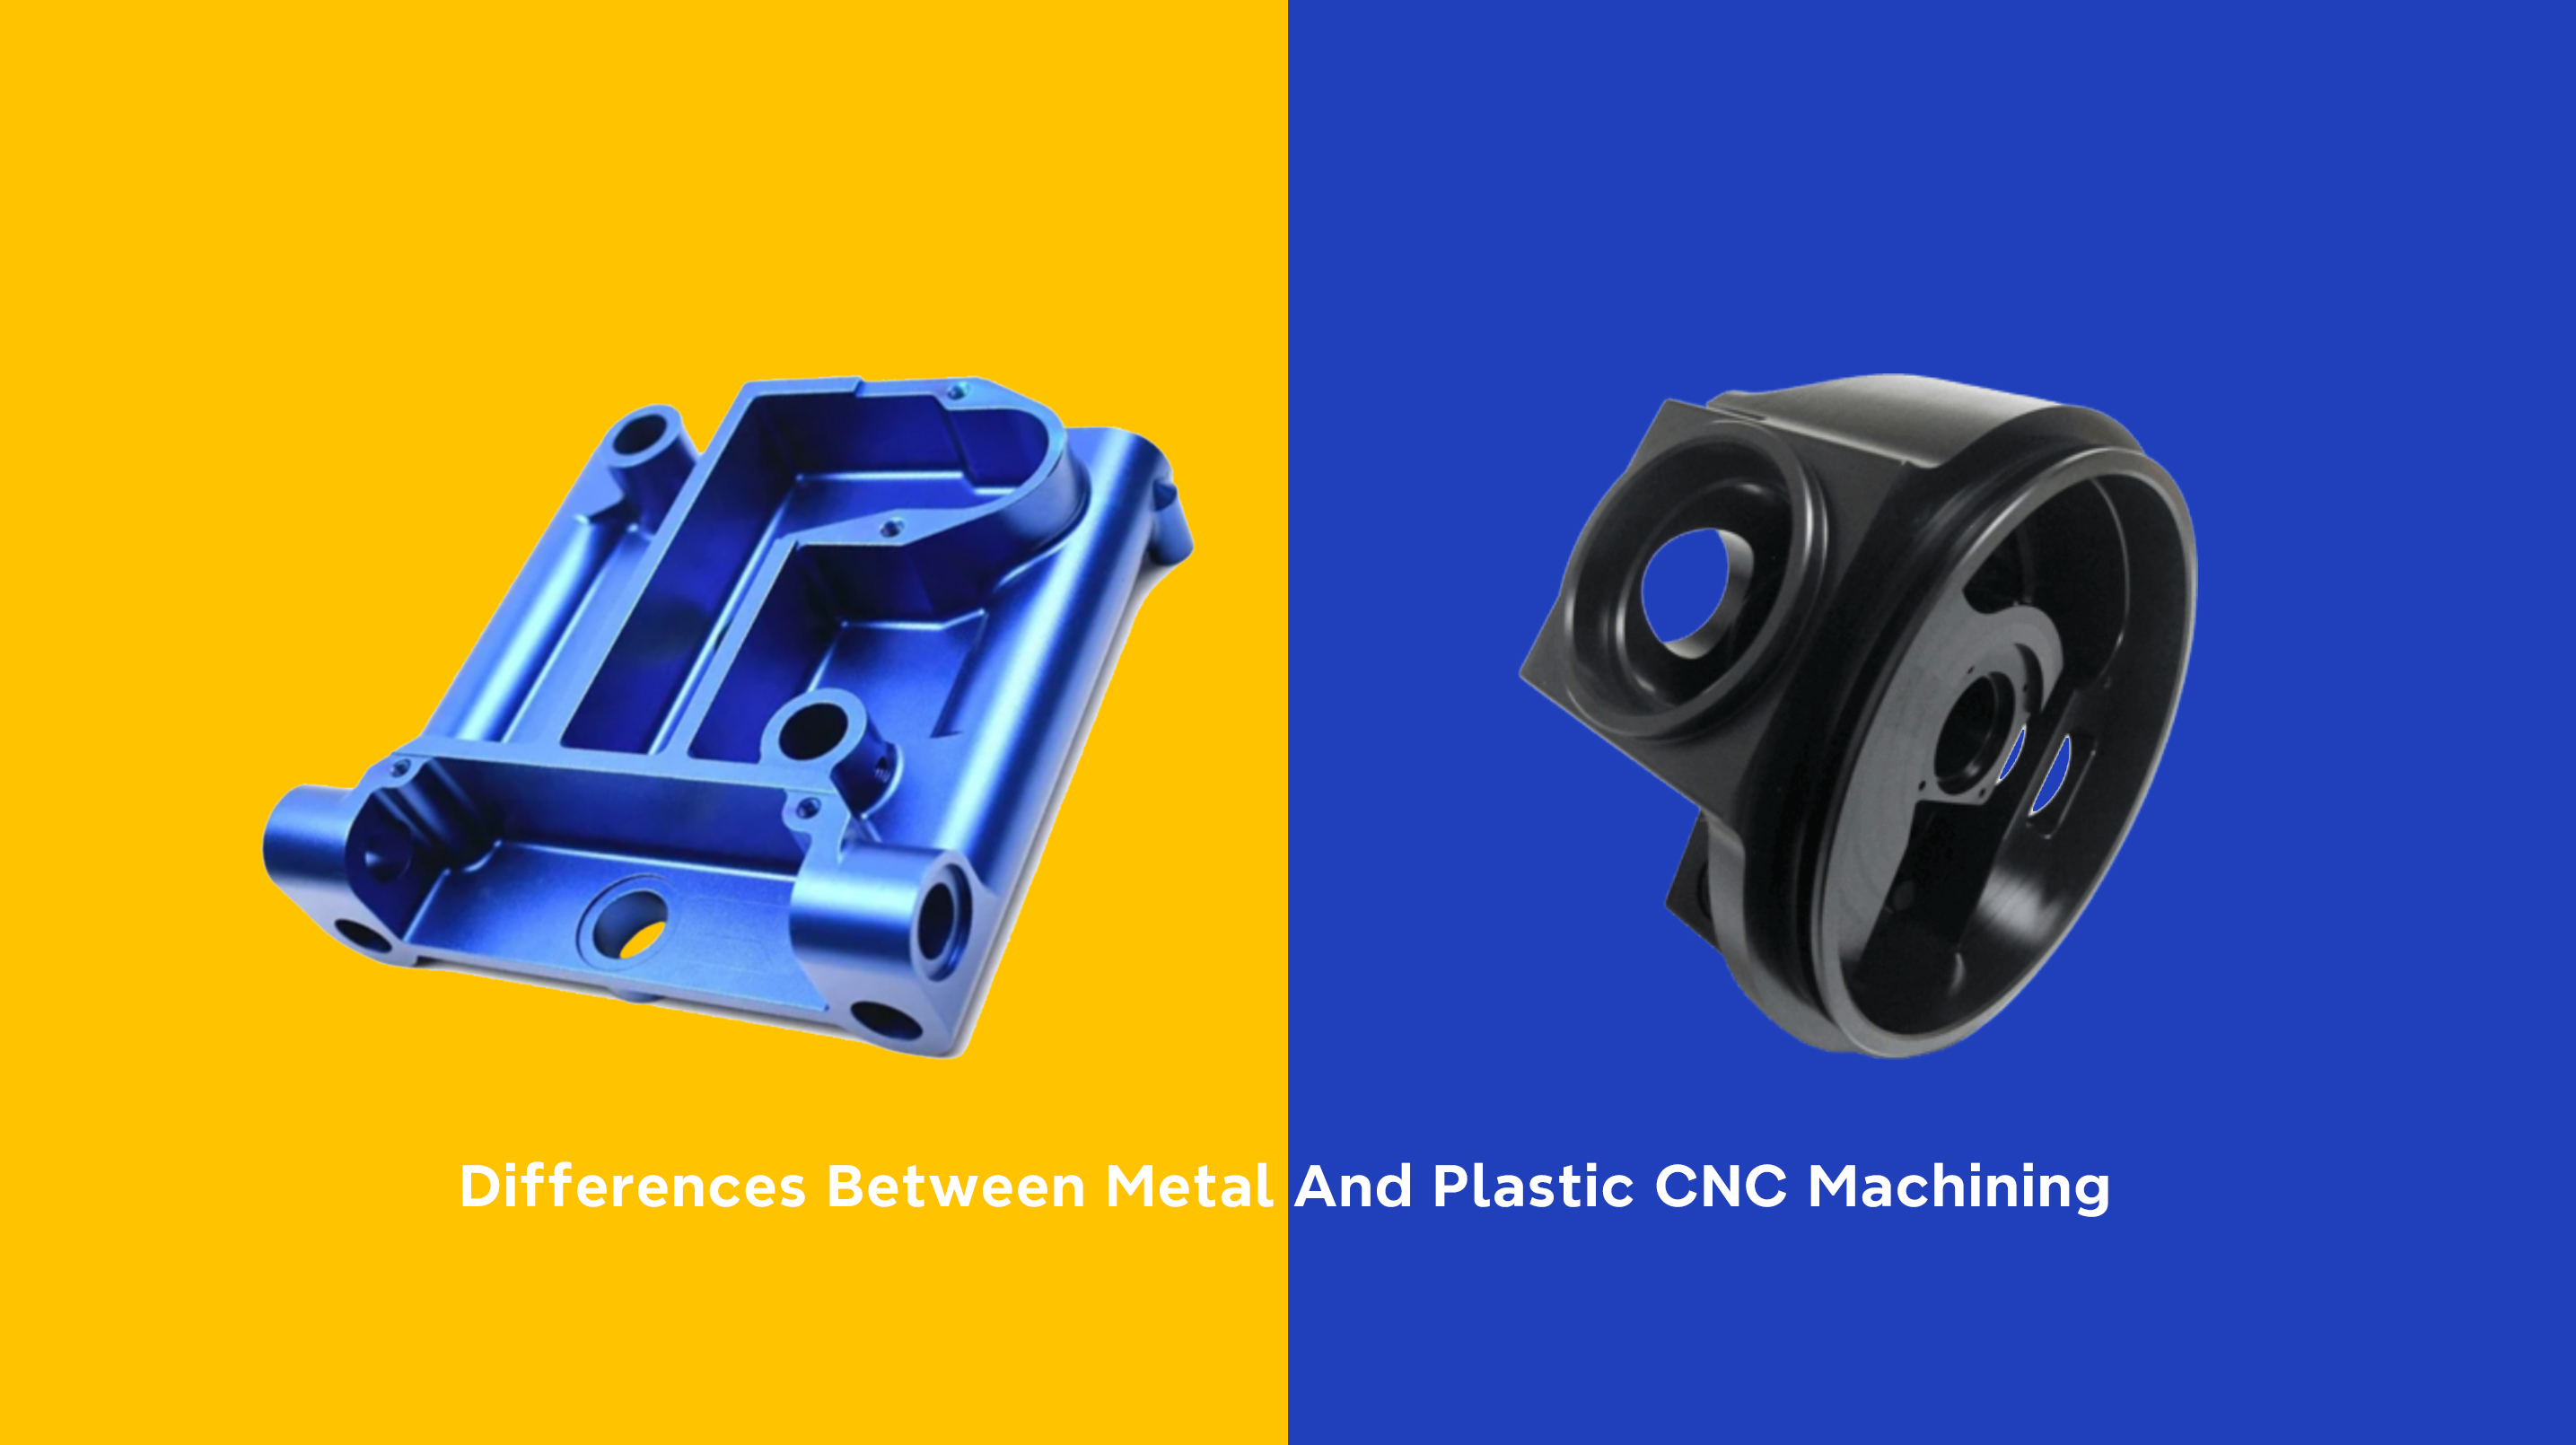 Differences Between Metal And Plastic CNC Machining